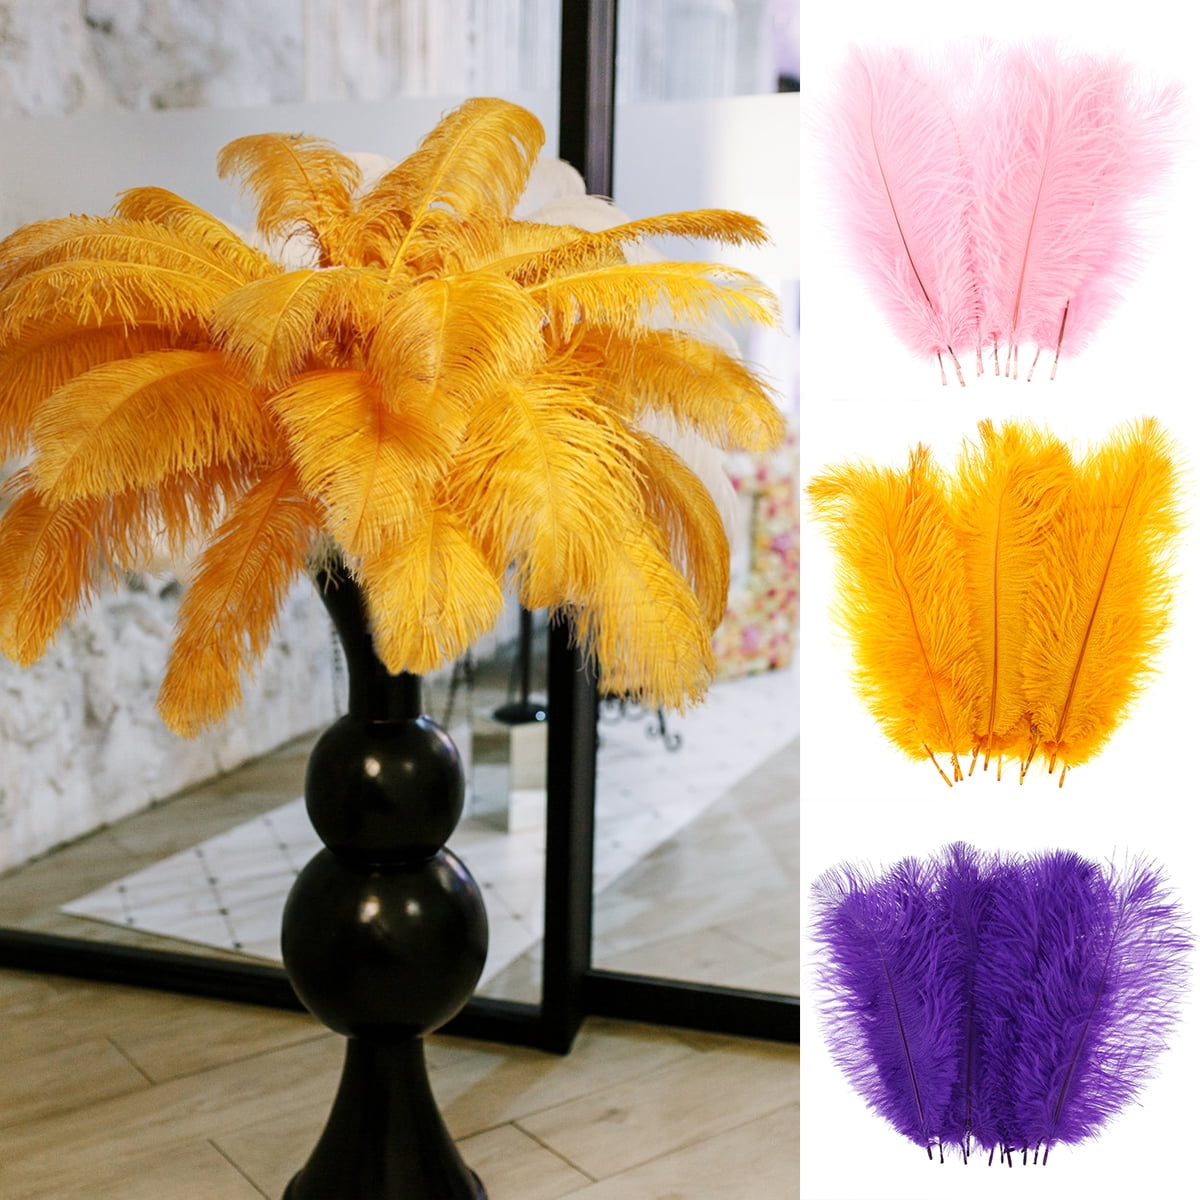  15 Pcs Mardi Gras Ostrich Feathers for Crafts, 6-8 inch  Colorful Feather Purple, Green, Gold Feathers for Mardi Gras DIY Crafts,  Vase, Party Centerpieces : Arts, Crafts & Sewing